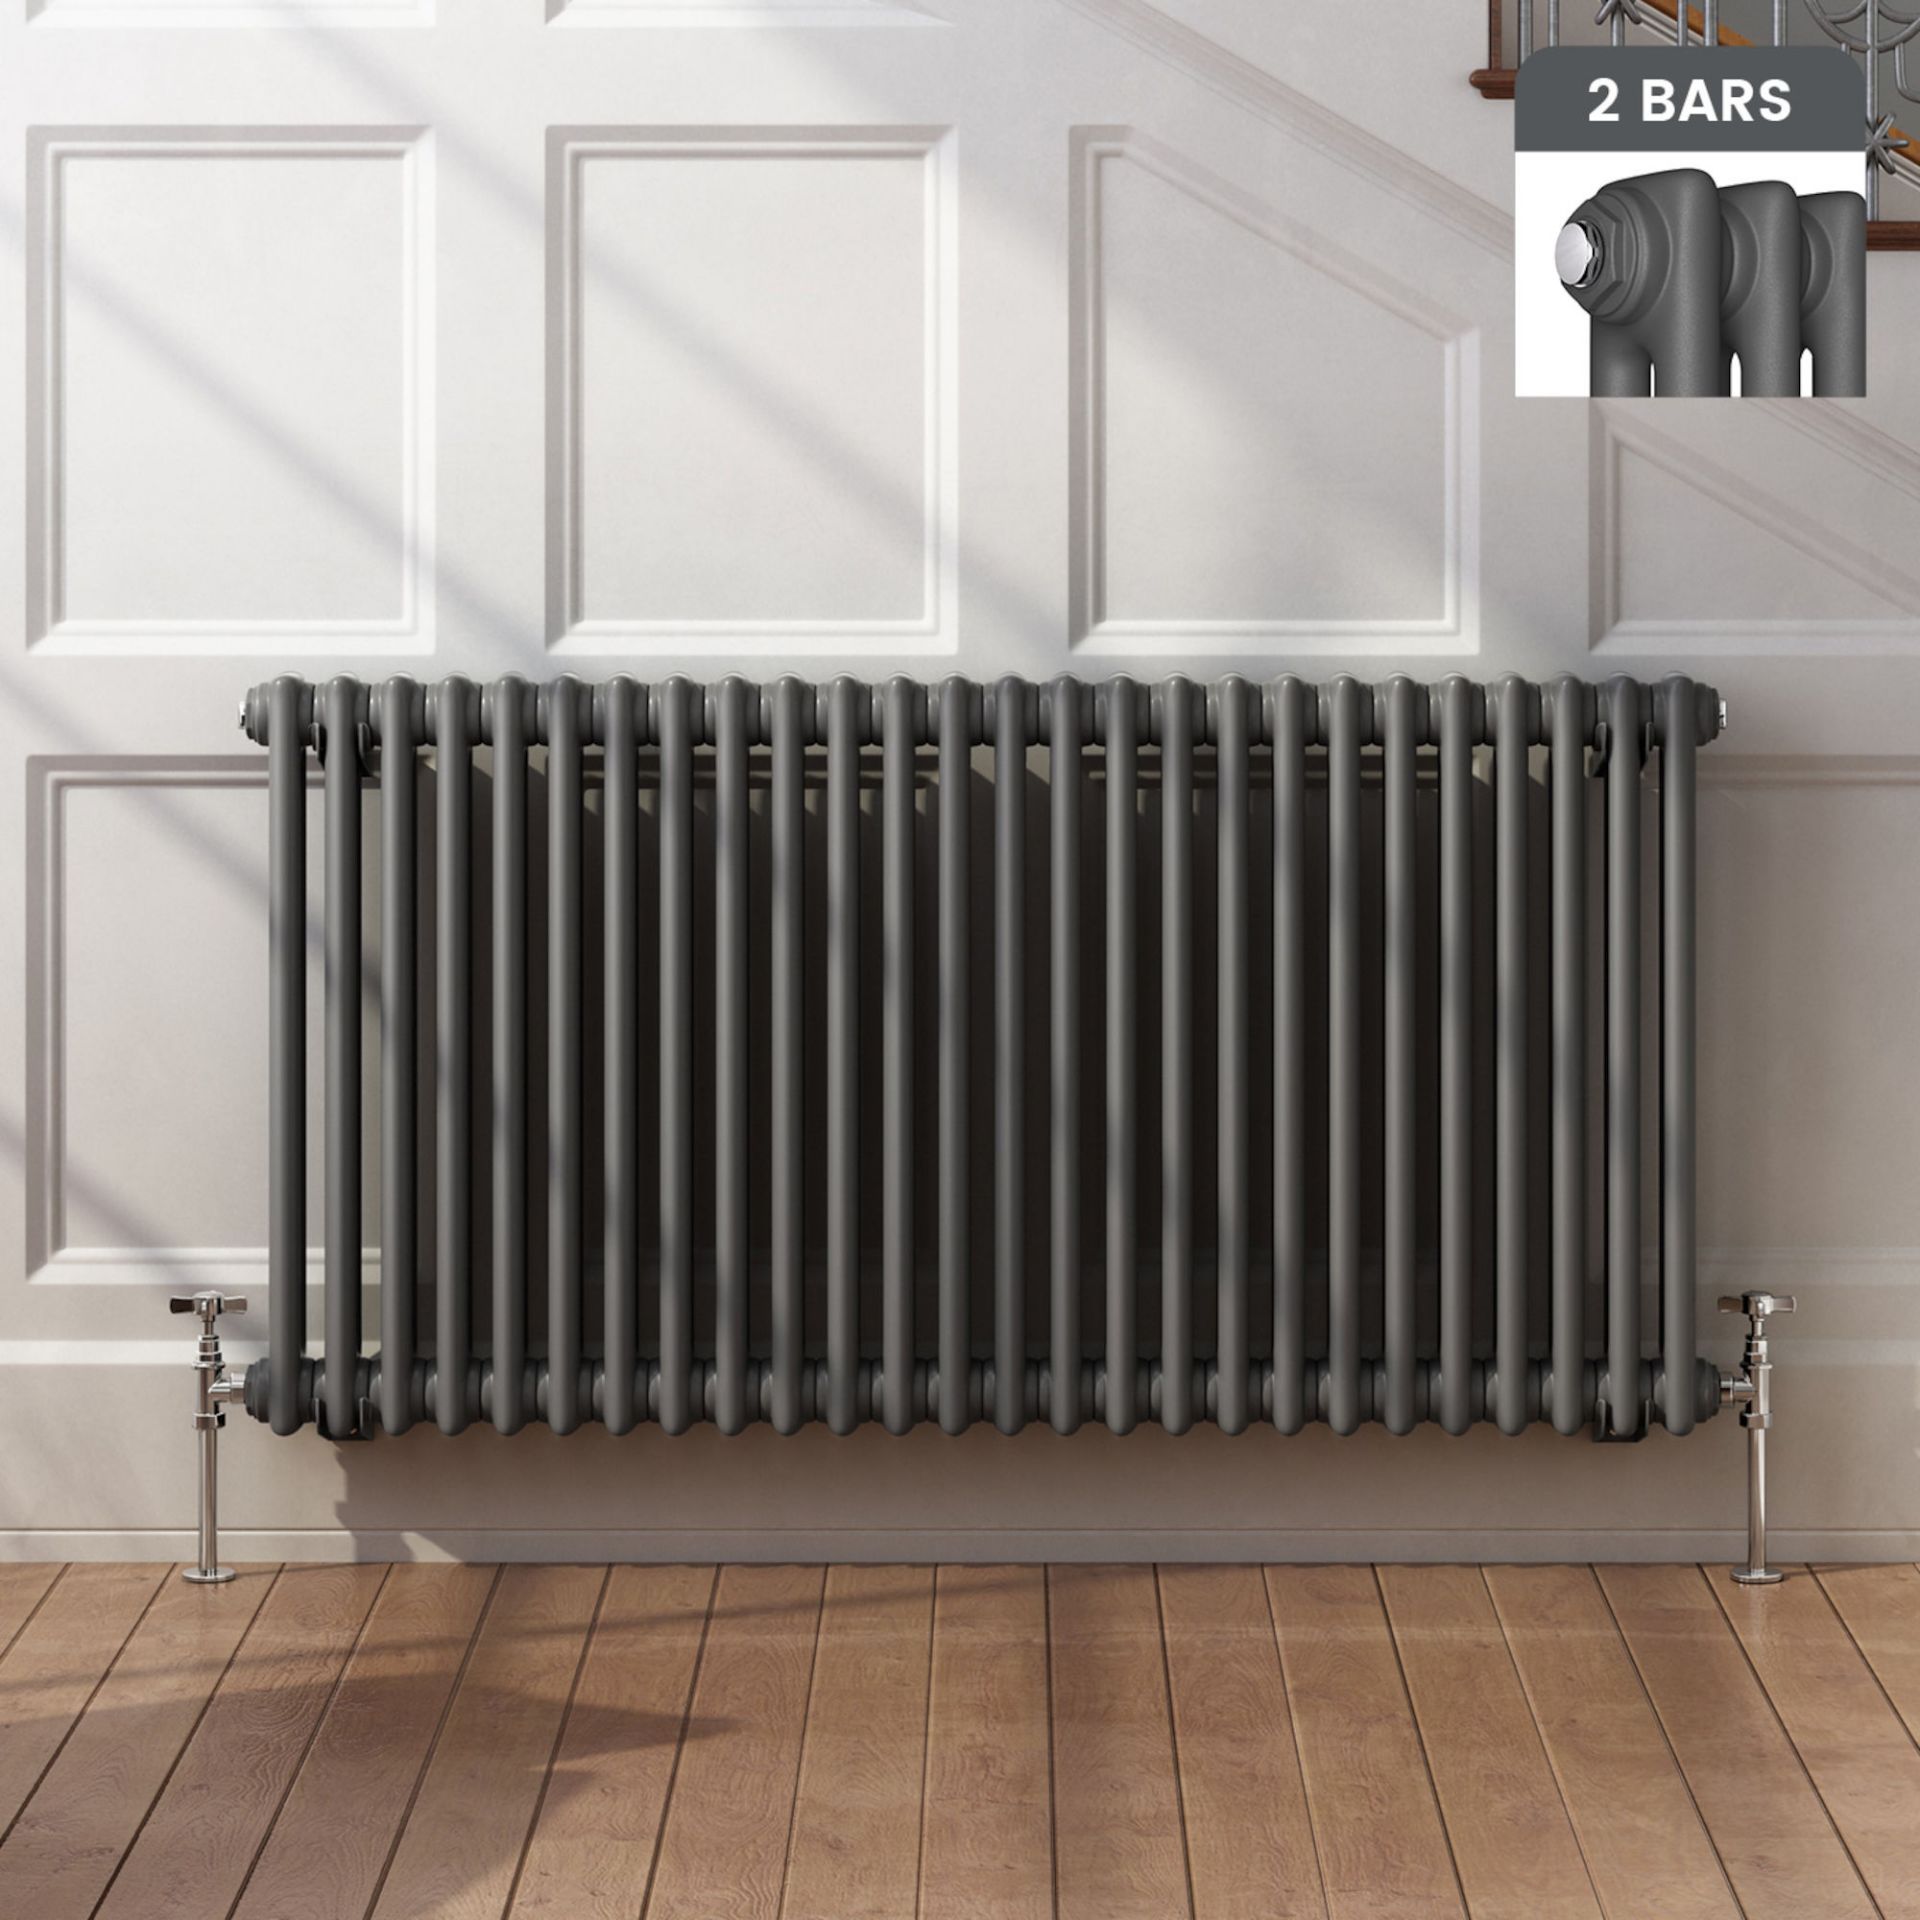 (XM10) 600x1188mm Anthracite Double Panel Horizontal Colosseum Traditional Radiator. RRP £399.99.